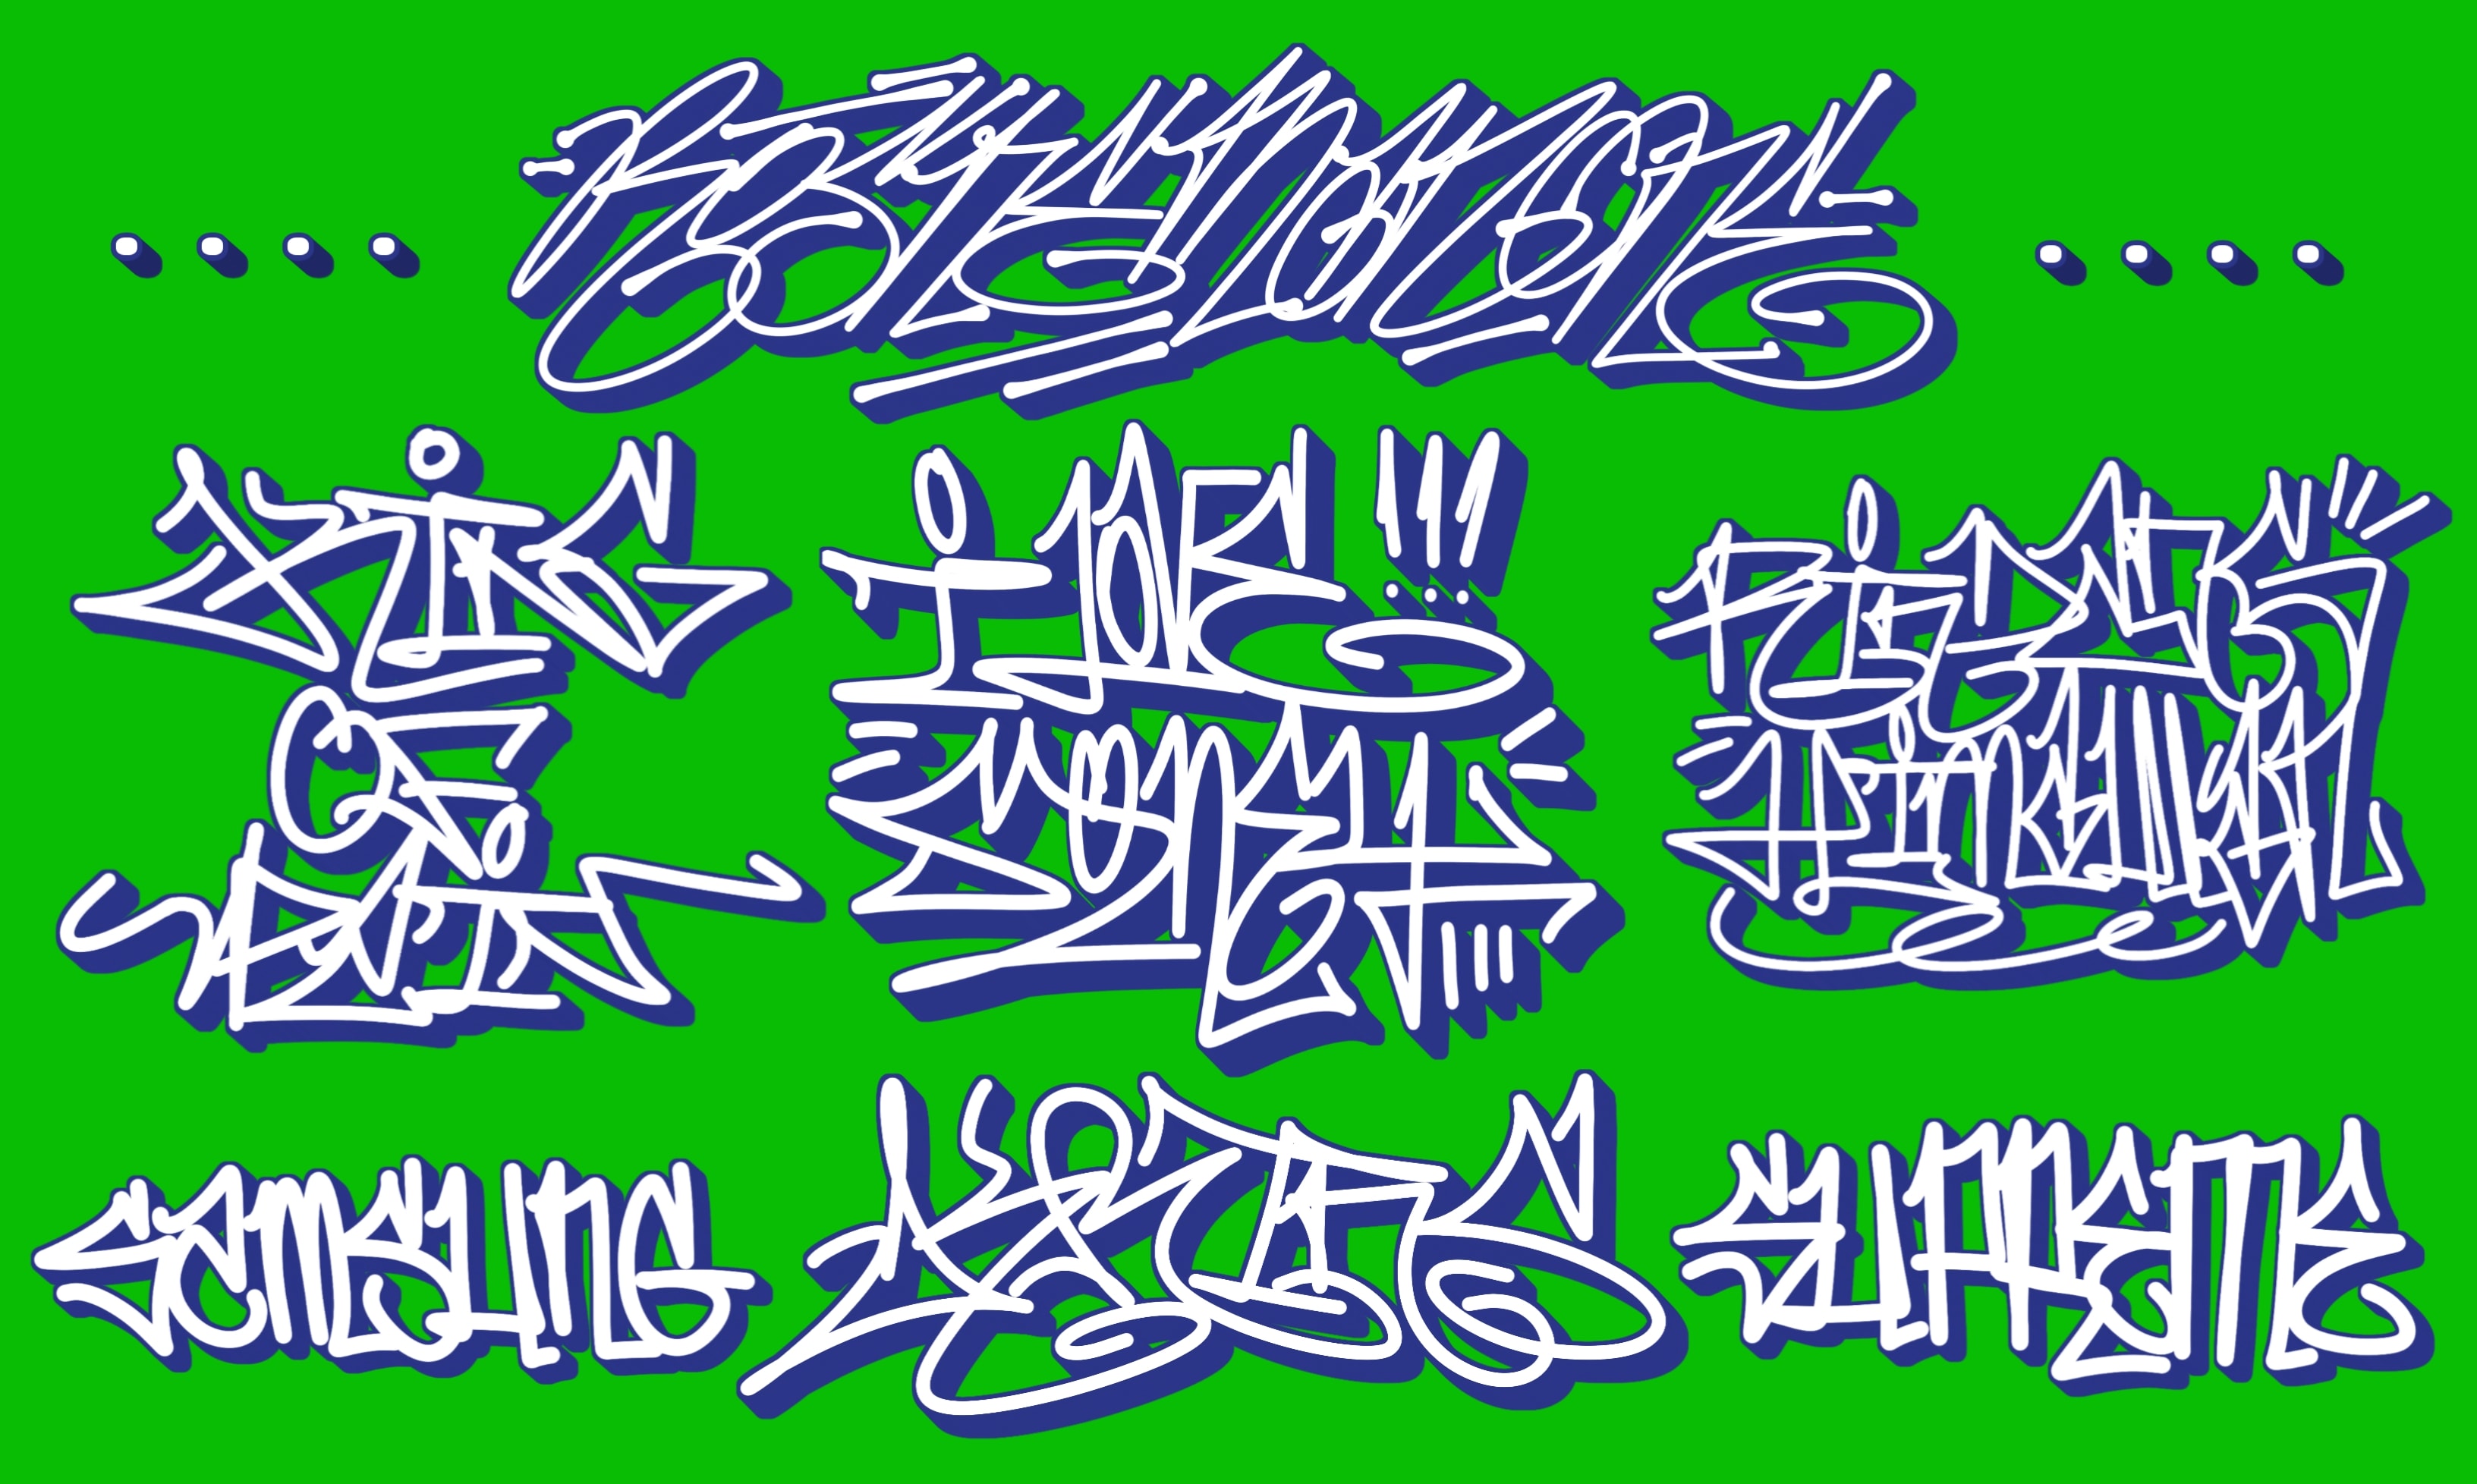 Handwriting text, Get your groove on. Graffiti style hand